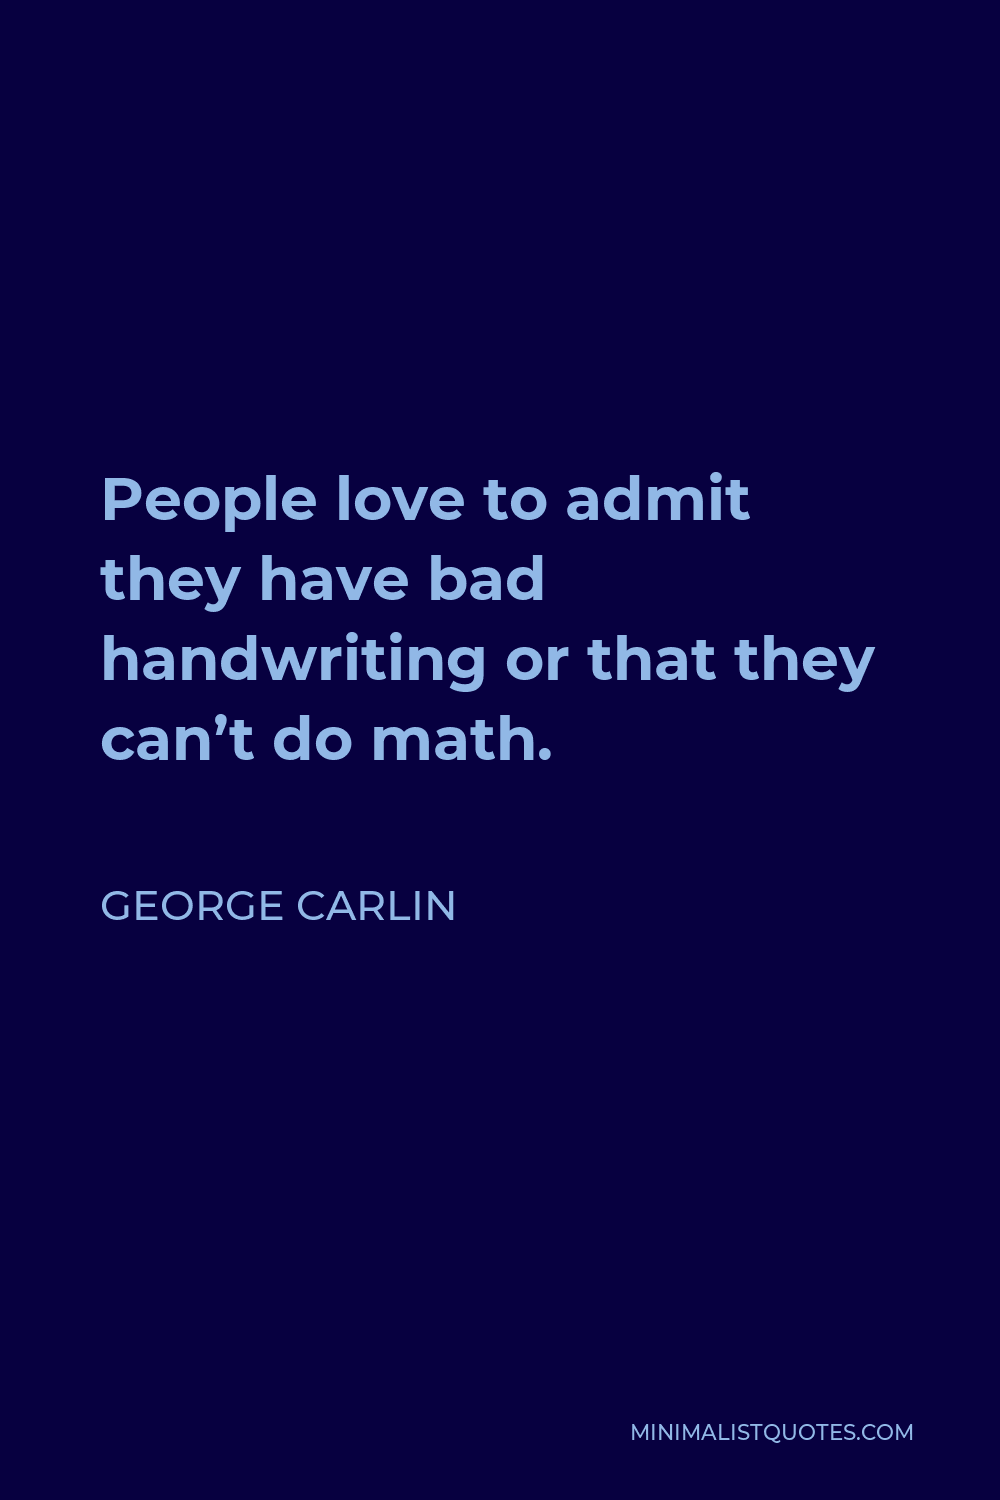 George Carlin Quote - People love to admit they have bad handwriting or that they can’t do math.